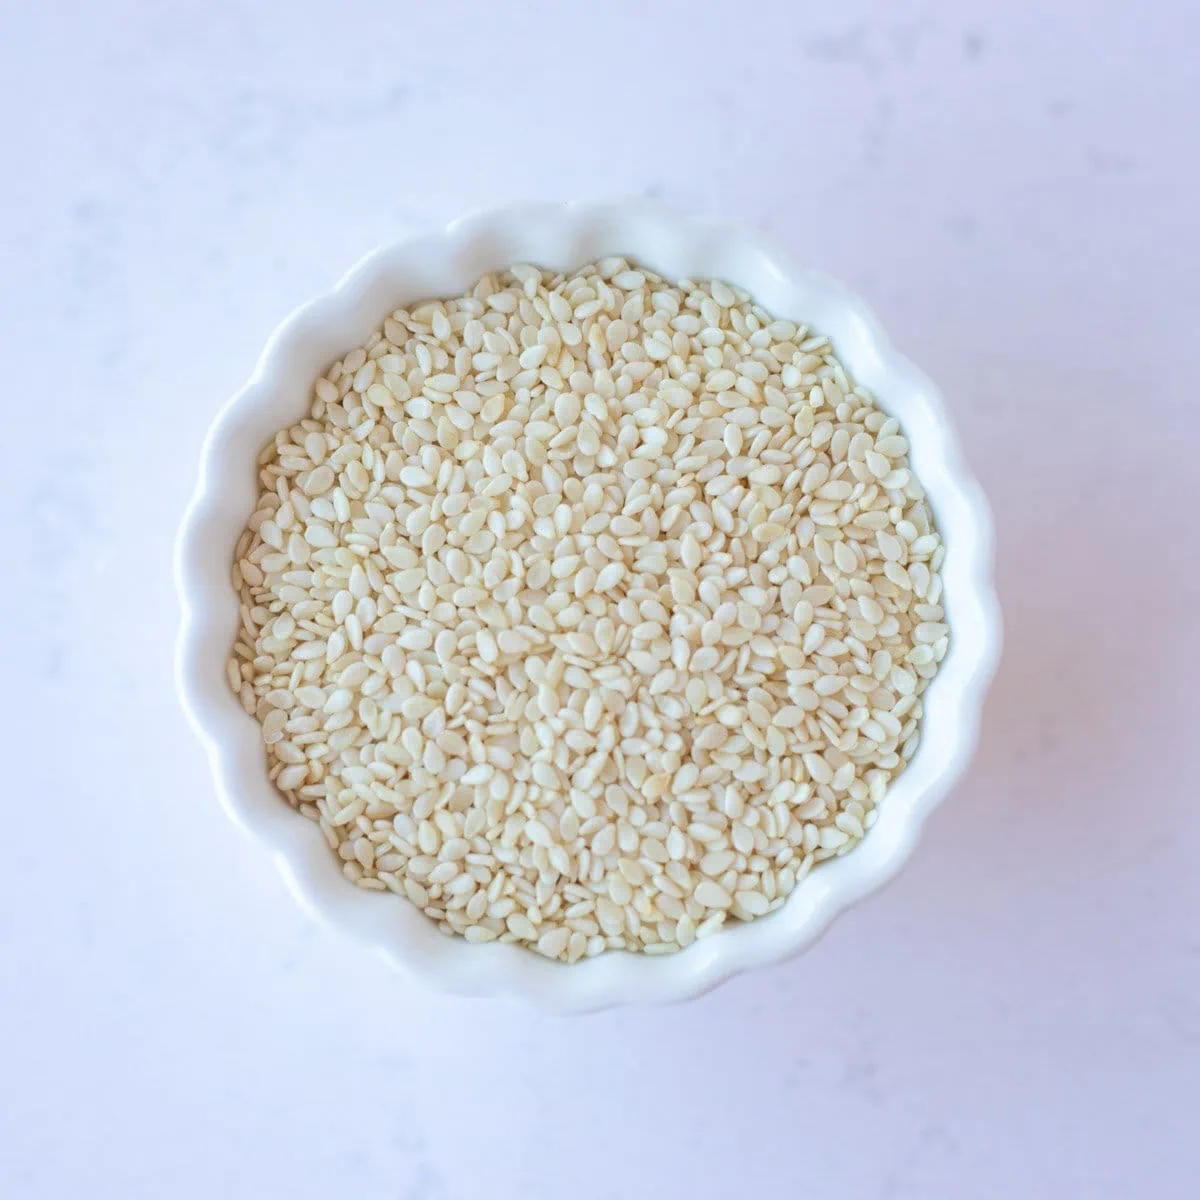 Sesame seeds in a small white bowl.